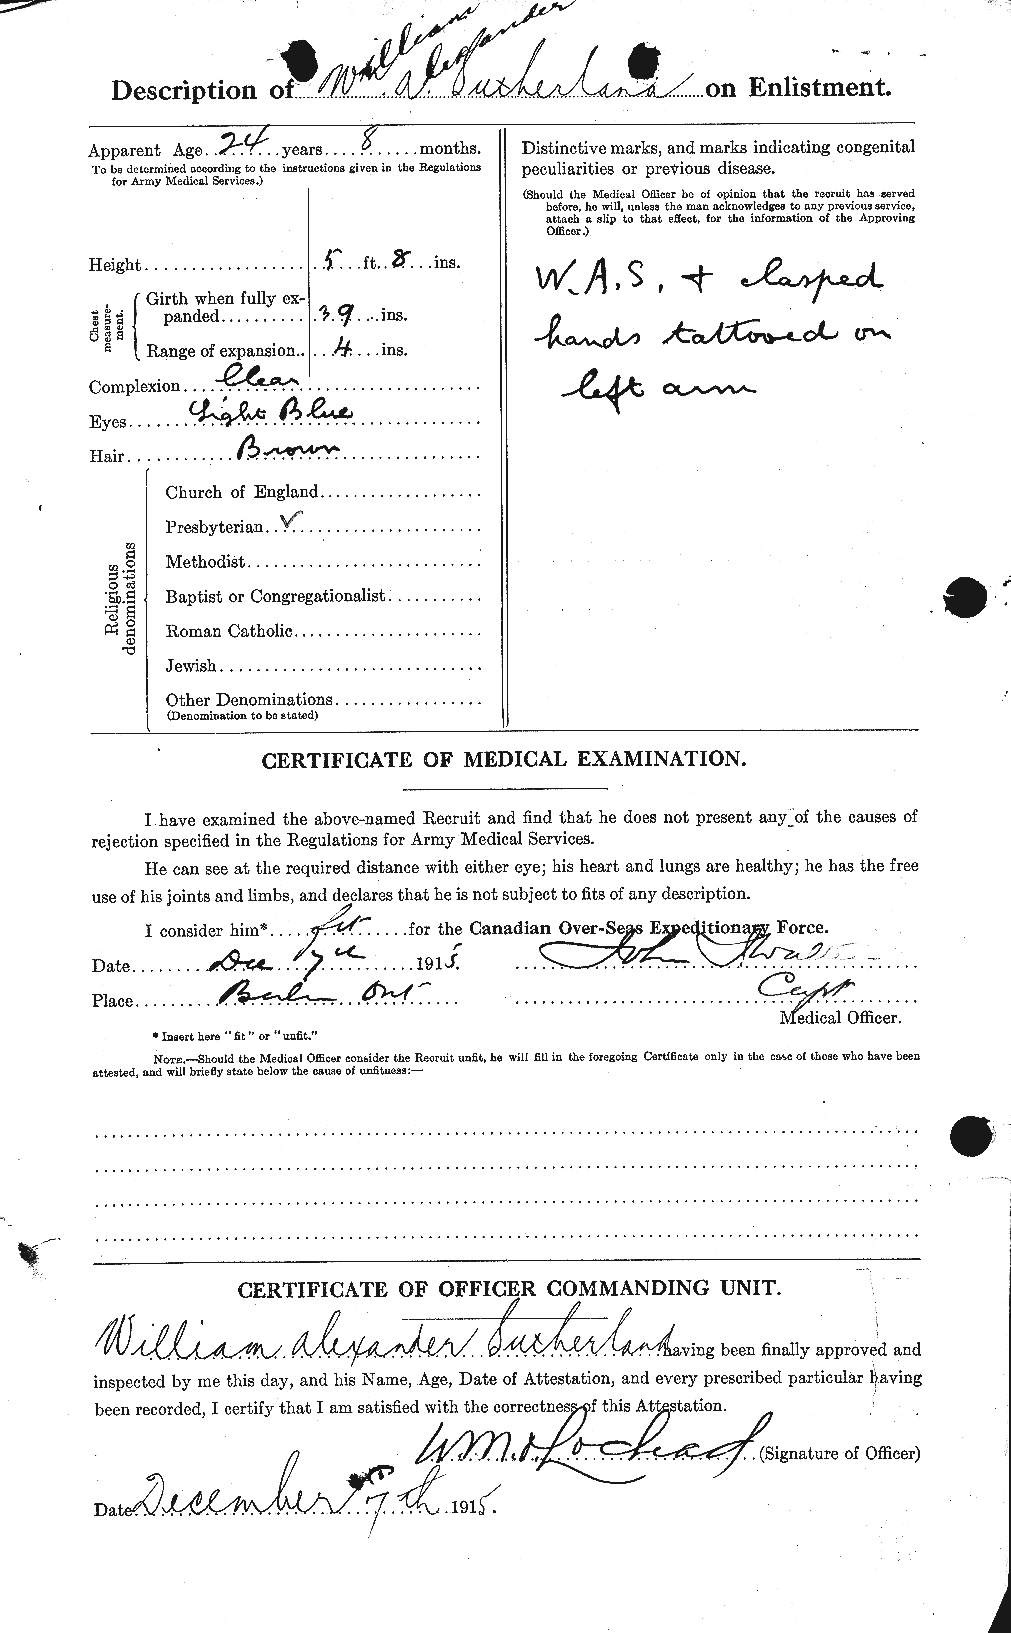 Personnel Records of the First World War - CEF 126448b